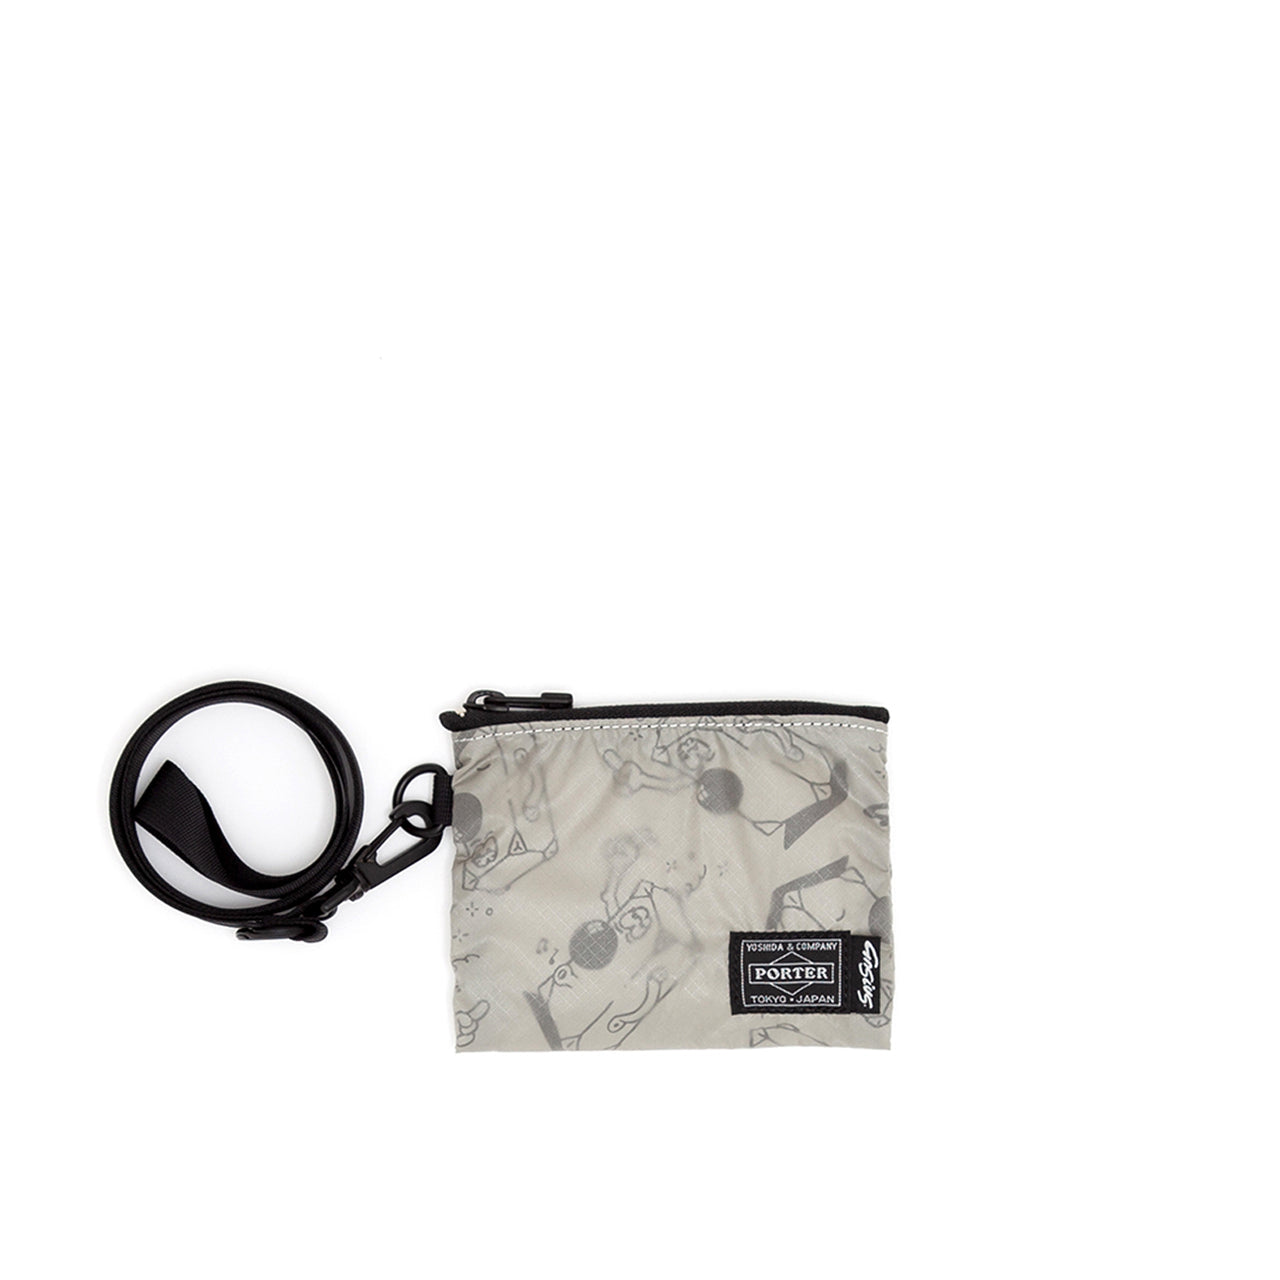 porter-yoshida & co. x gasius pouch and strap (grey) GAS-HP-PW - a